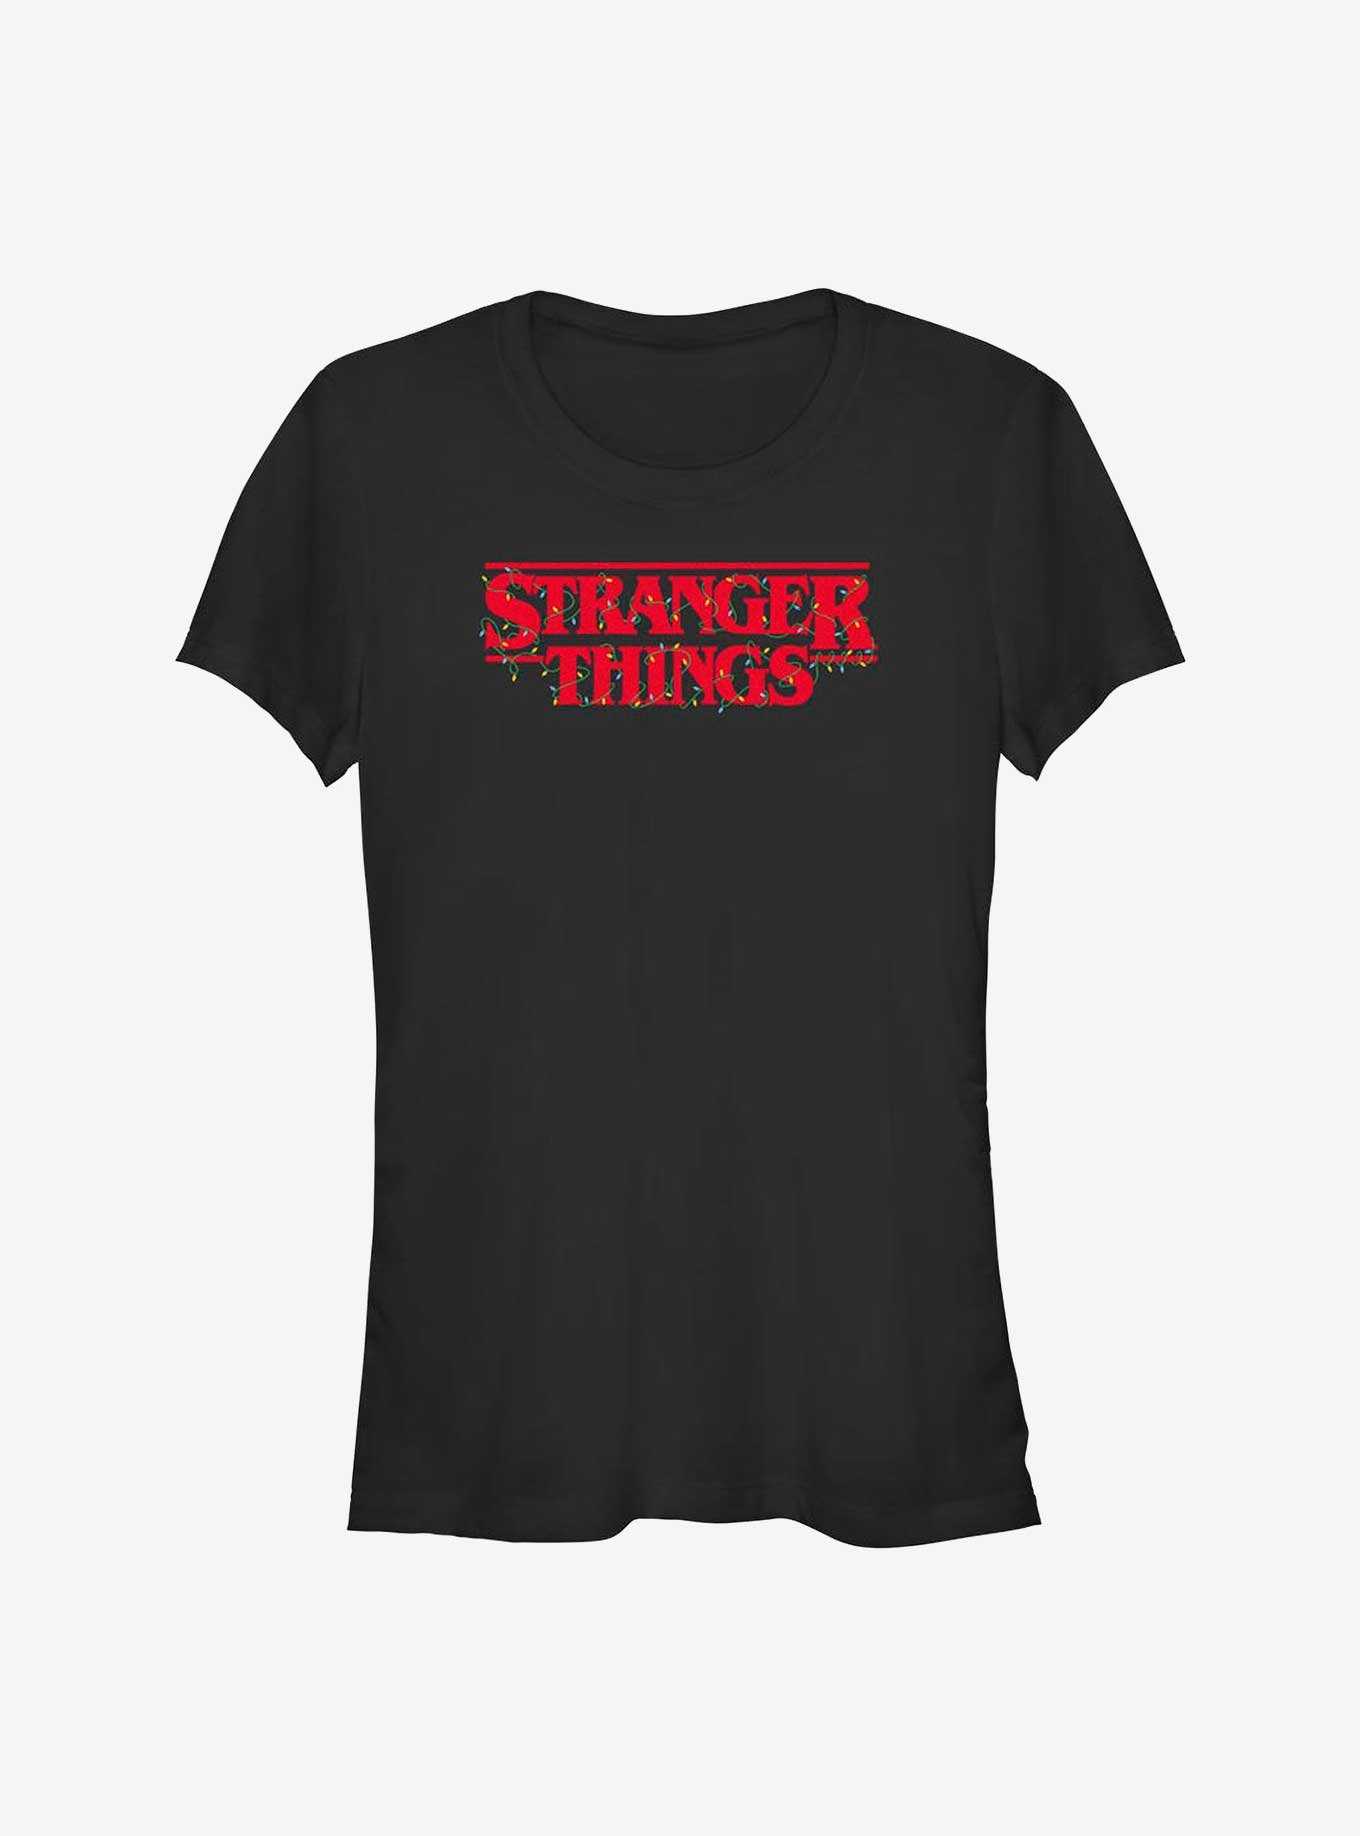 Free Roblox T-shirt Black and red preppy stranger things theme